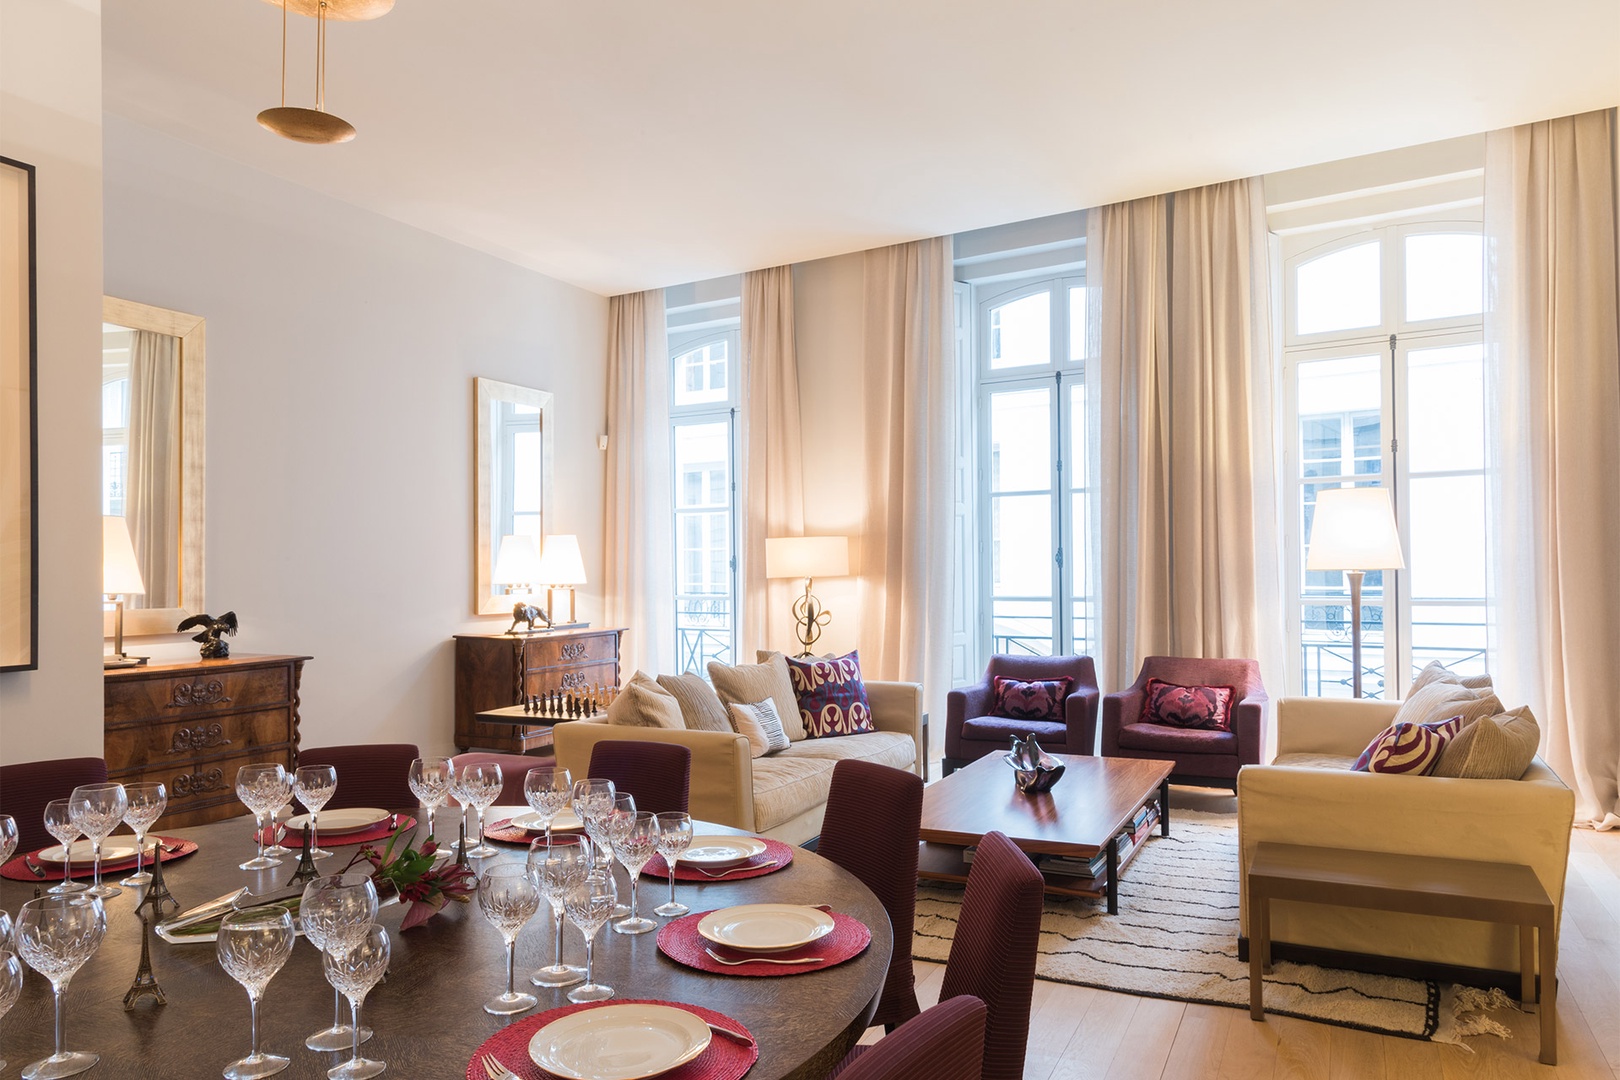 Your stylish haven in Paris